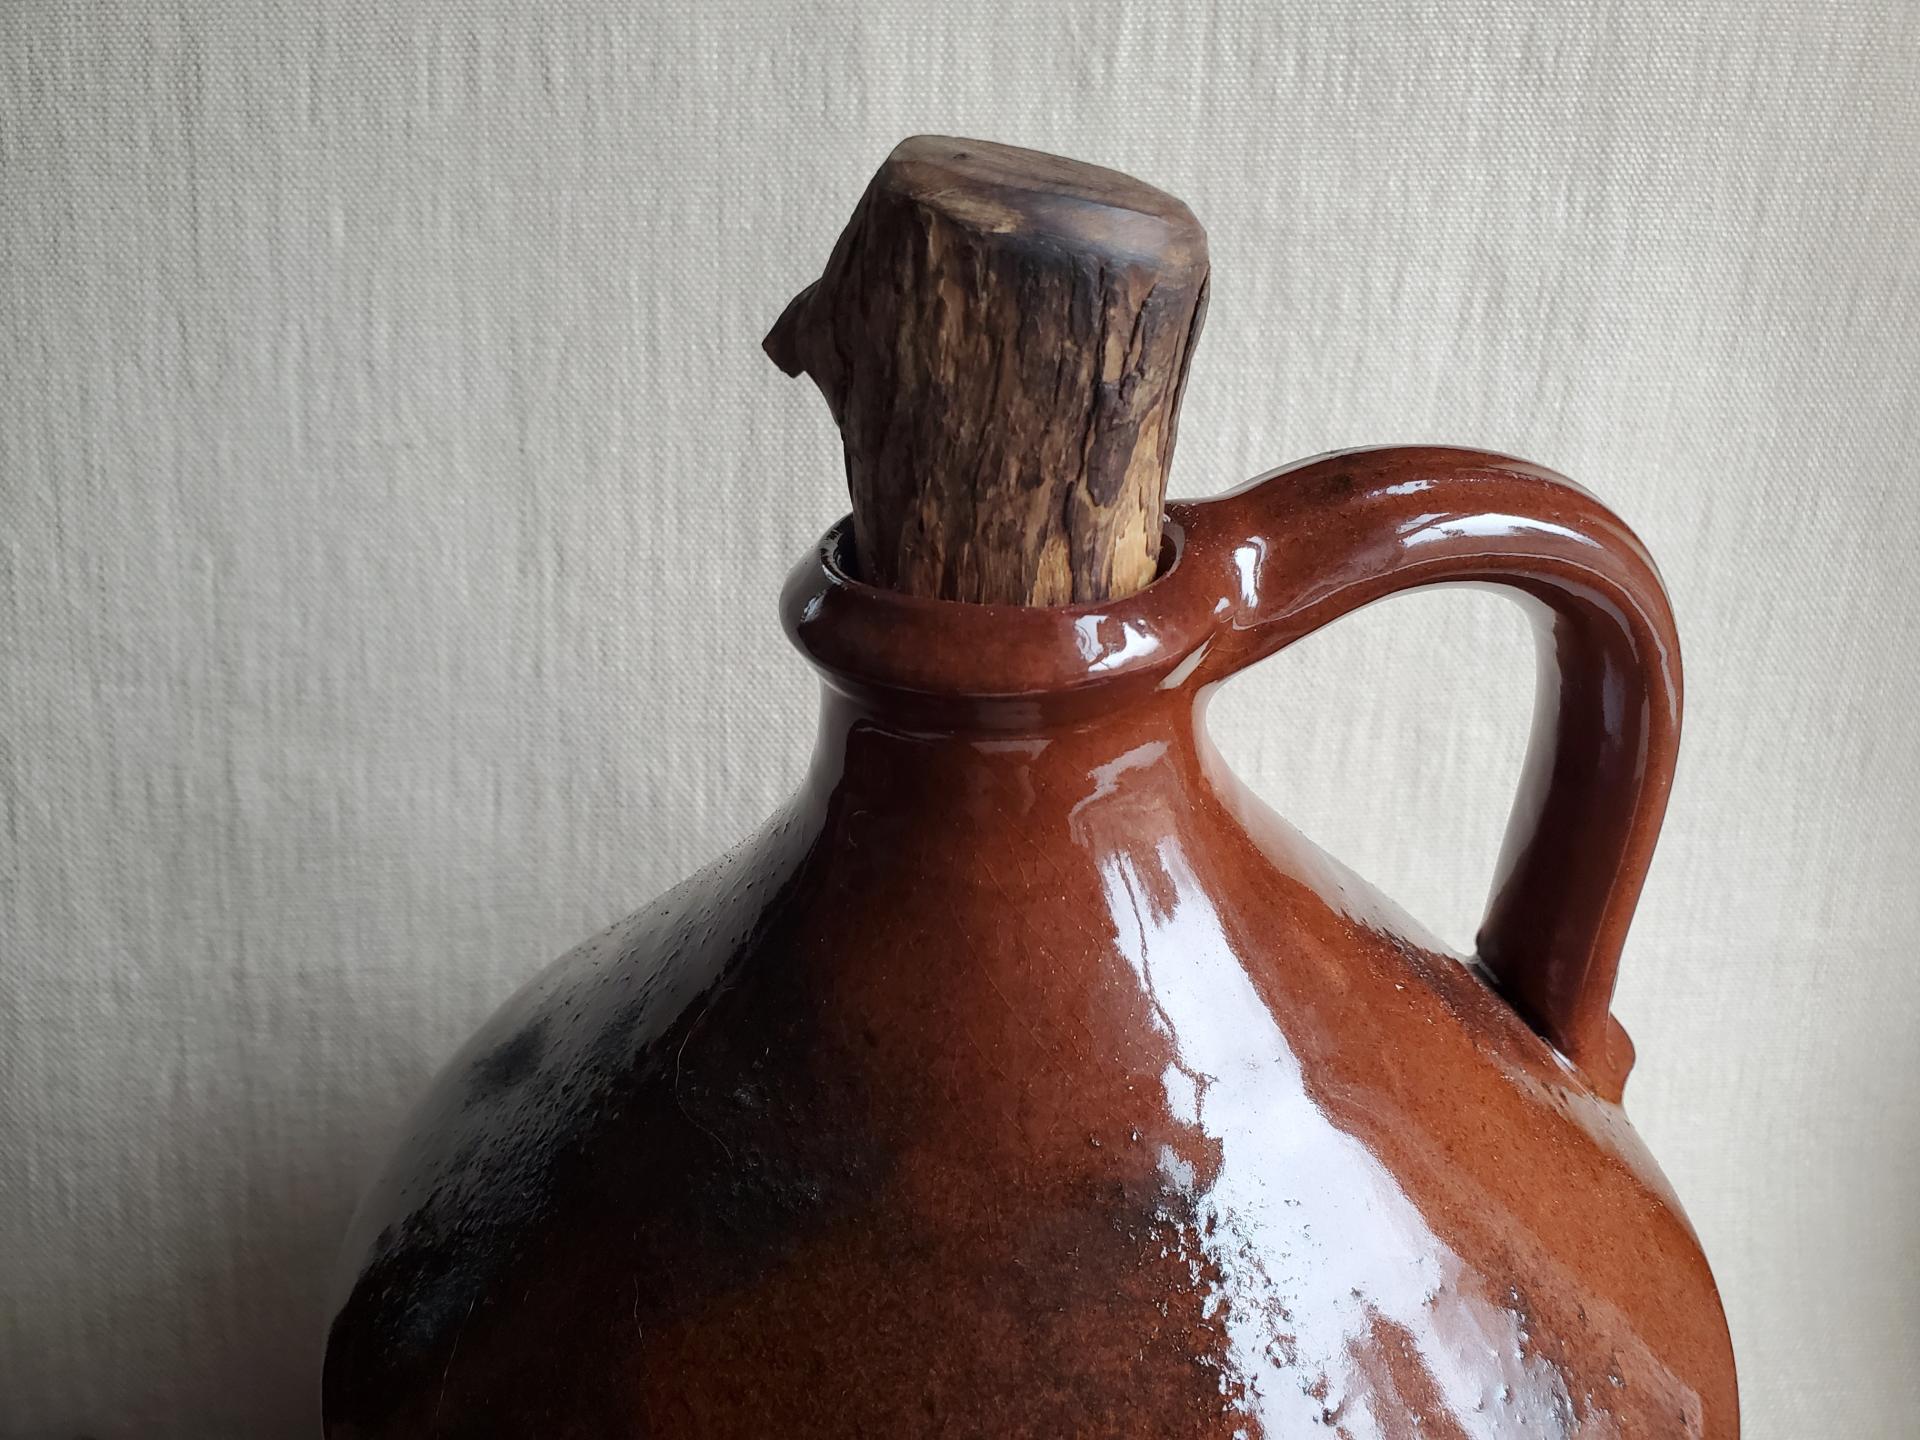 Redware Jug with Spangled Decoration